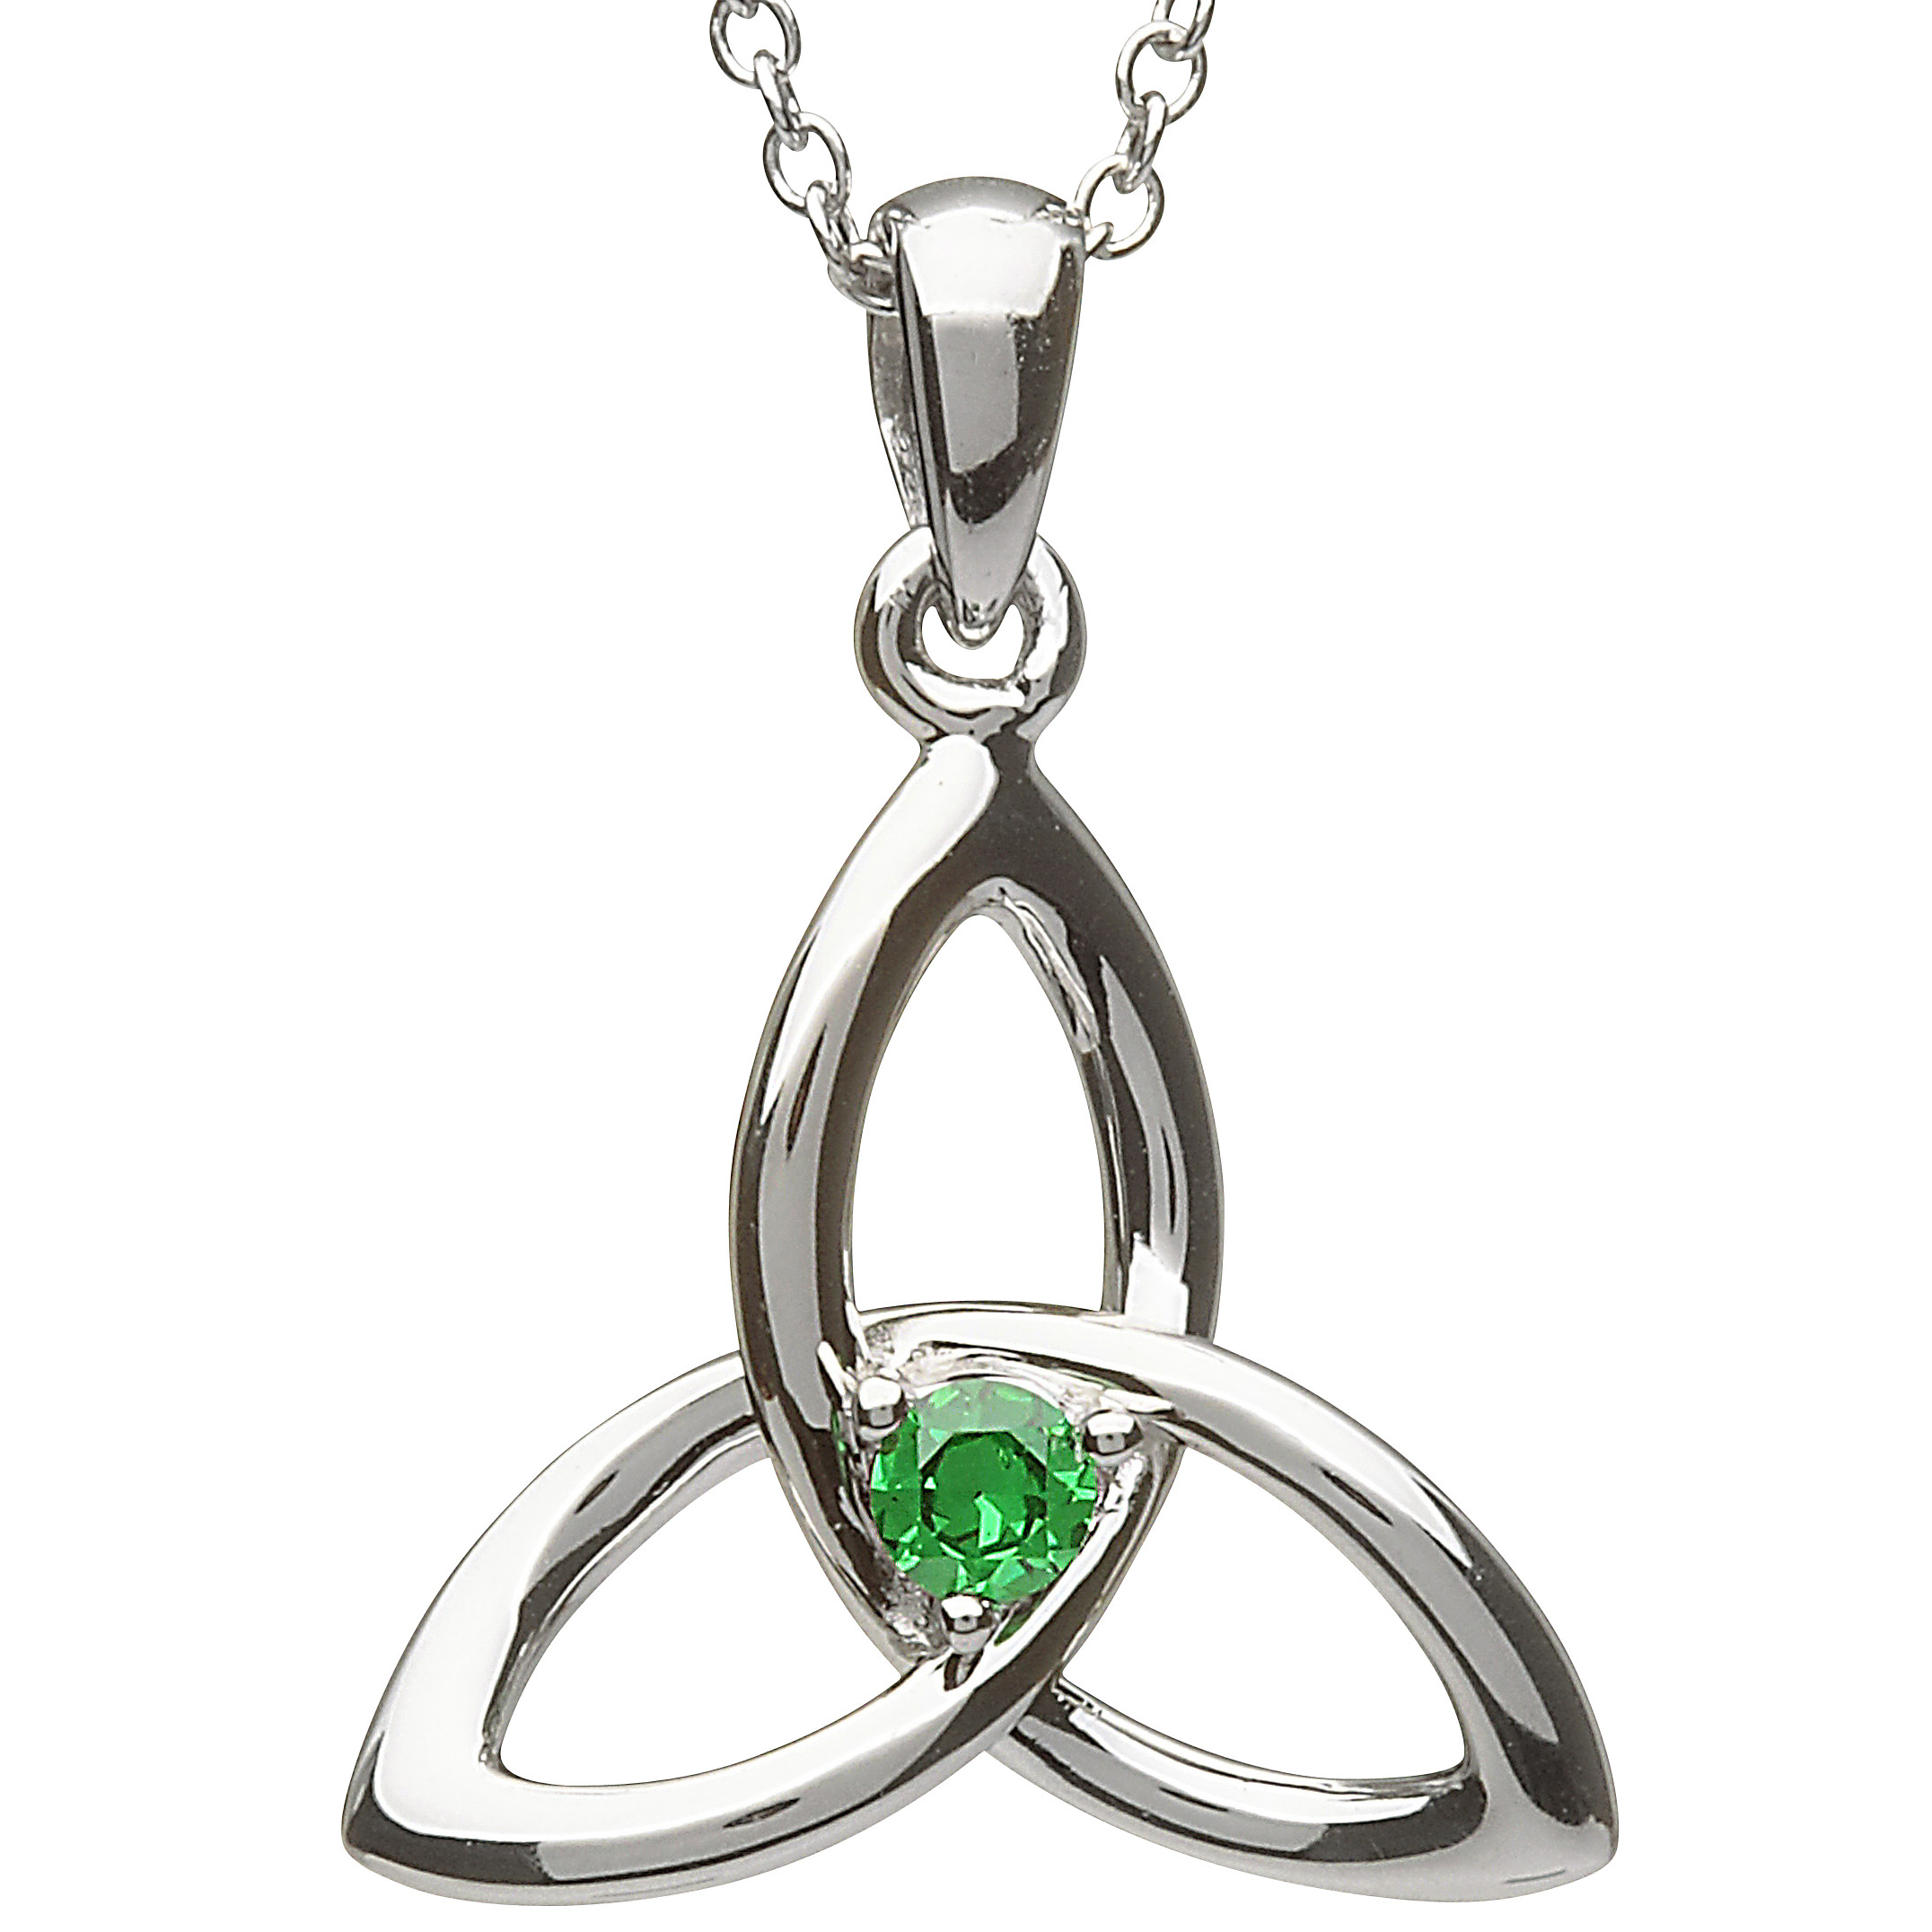 Product image for SALE | Trinity Knot Pendant - Sterling Silver Celtic Trinity Knot with Green Stone Pendant with Chain